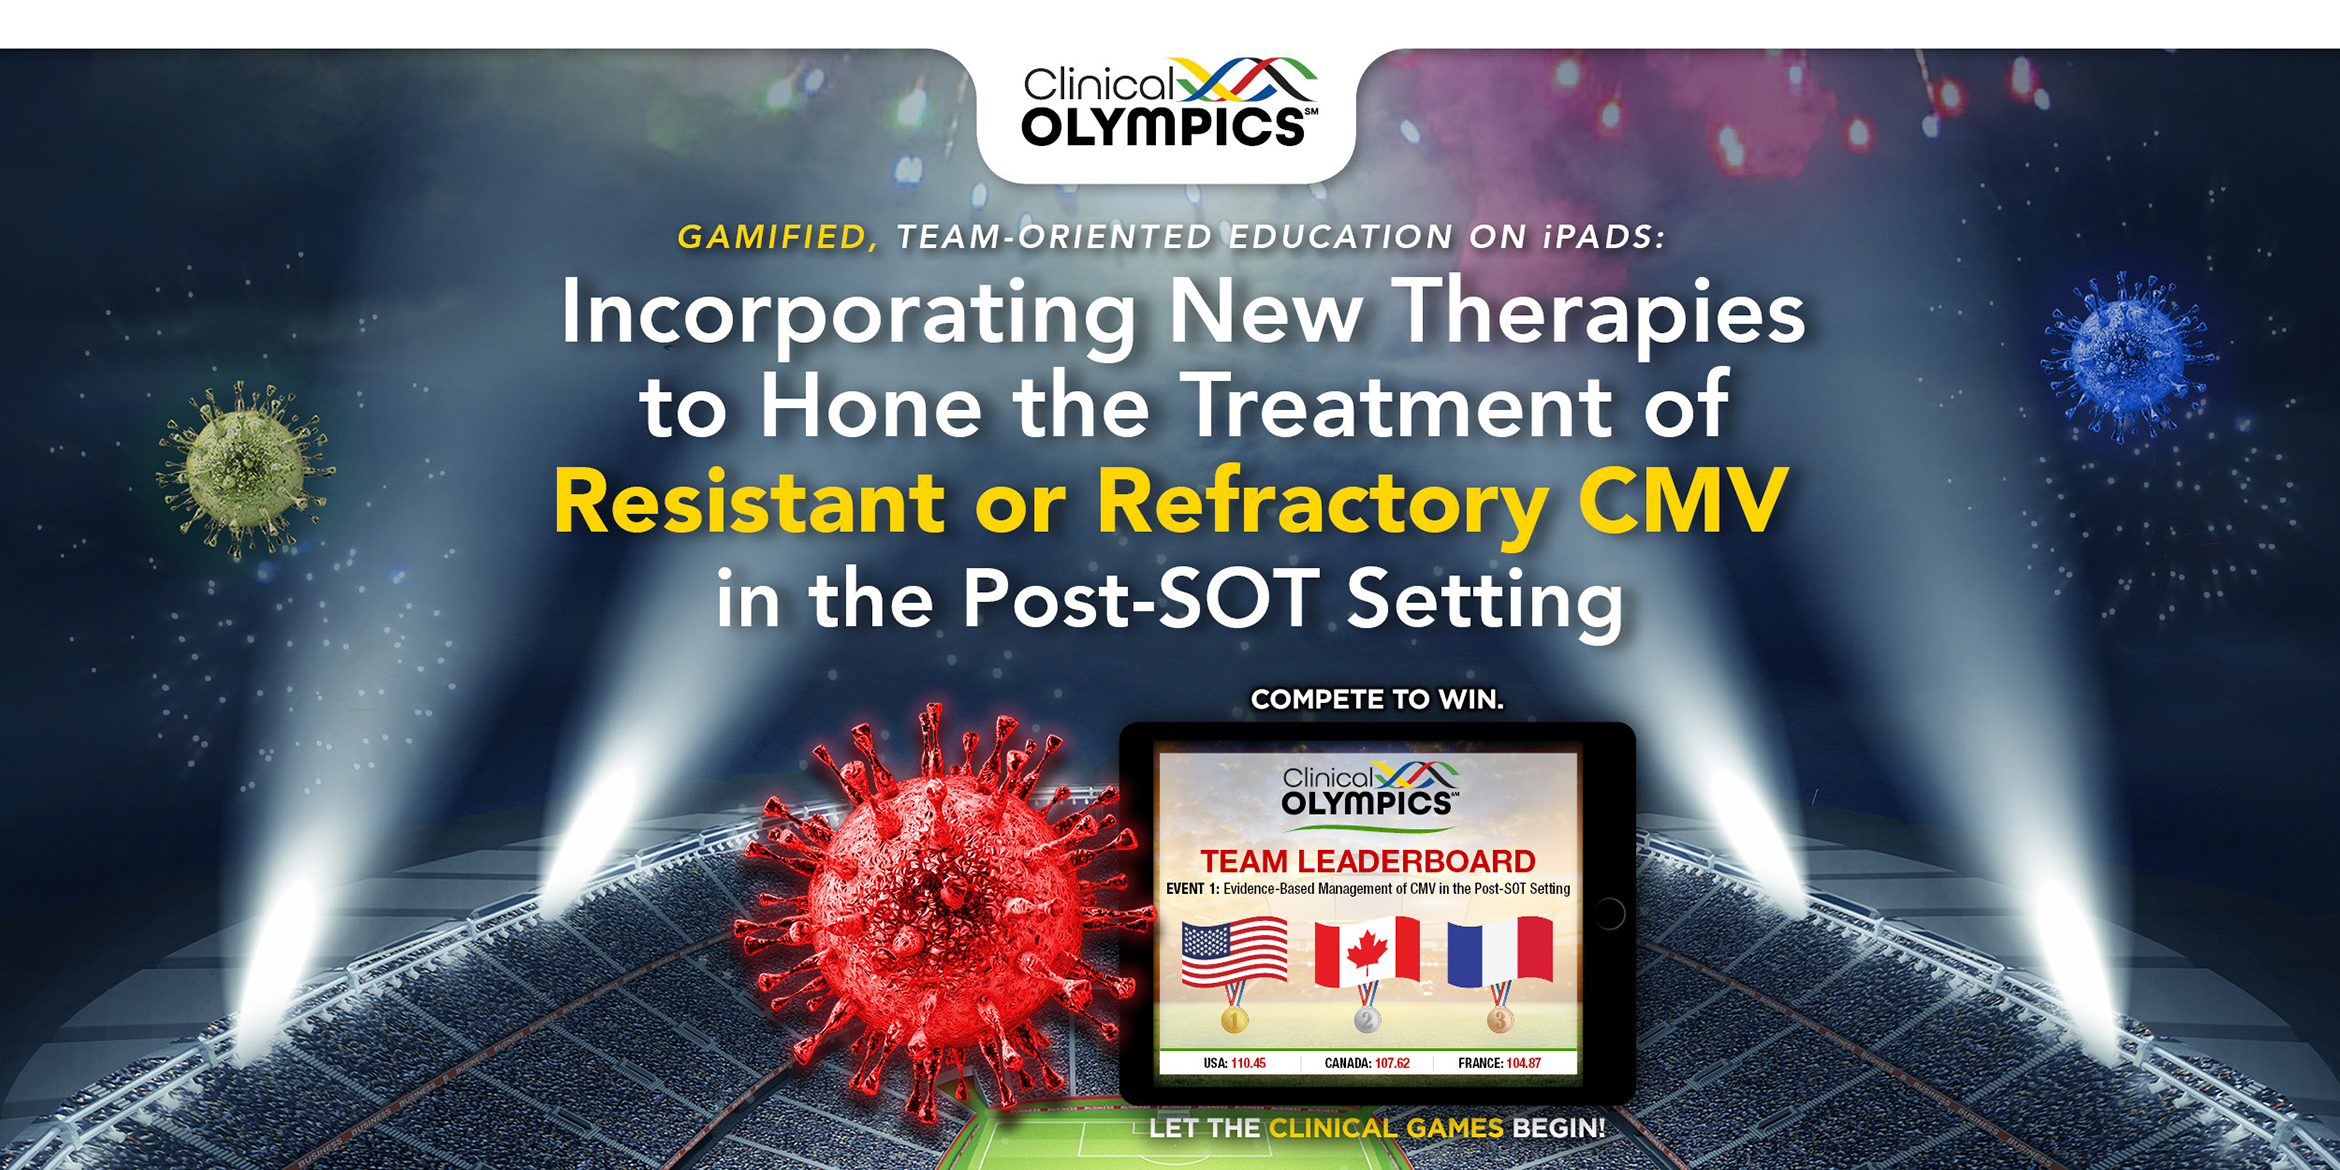 Gamified, Team-Oriented Education on iPads: Incorporating New Therapies to Hone the Treatment of Resistant or Refractory CMV in the Post-SOT Setting